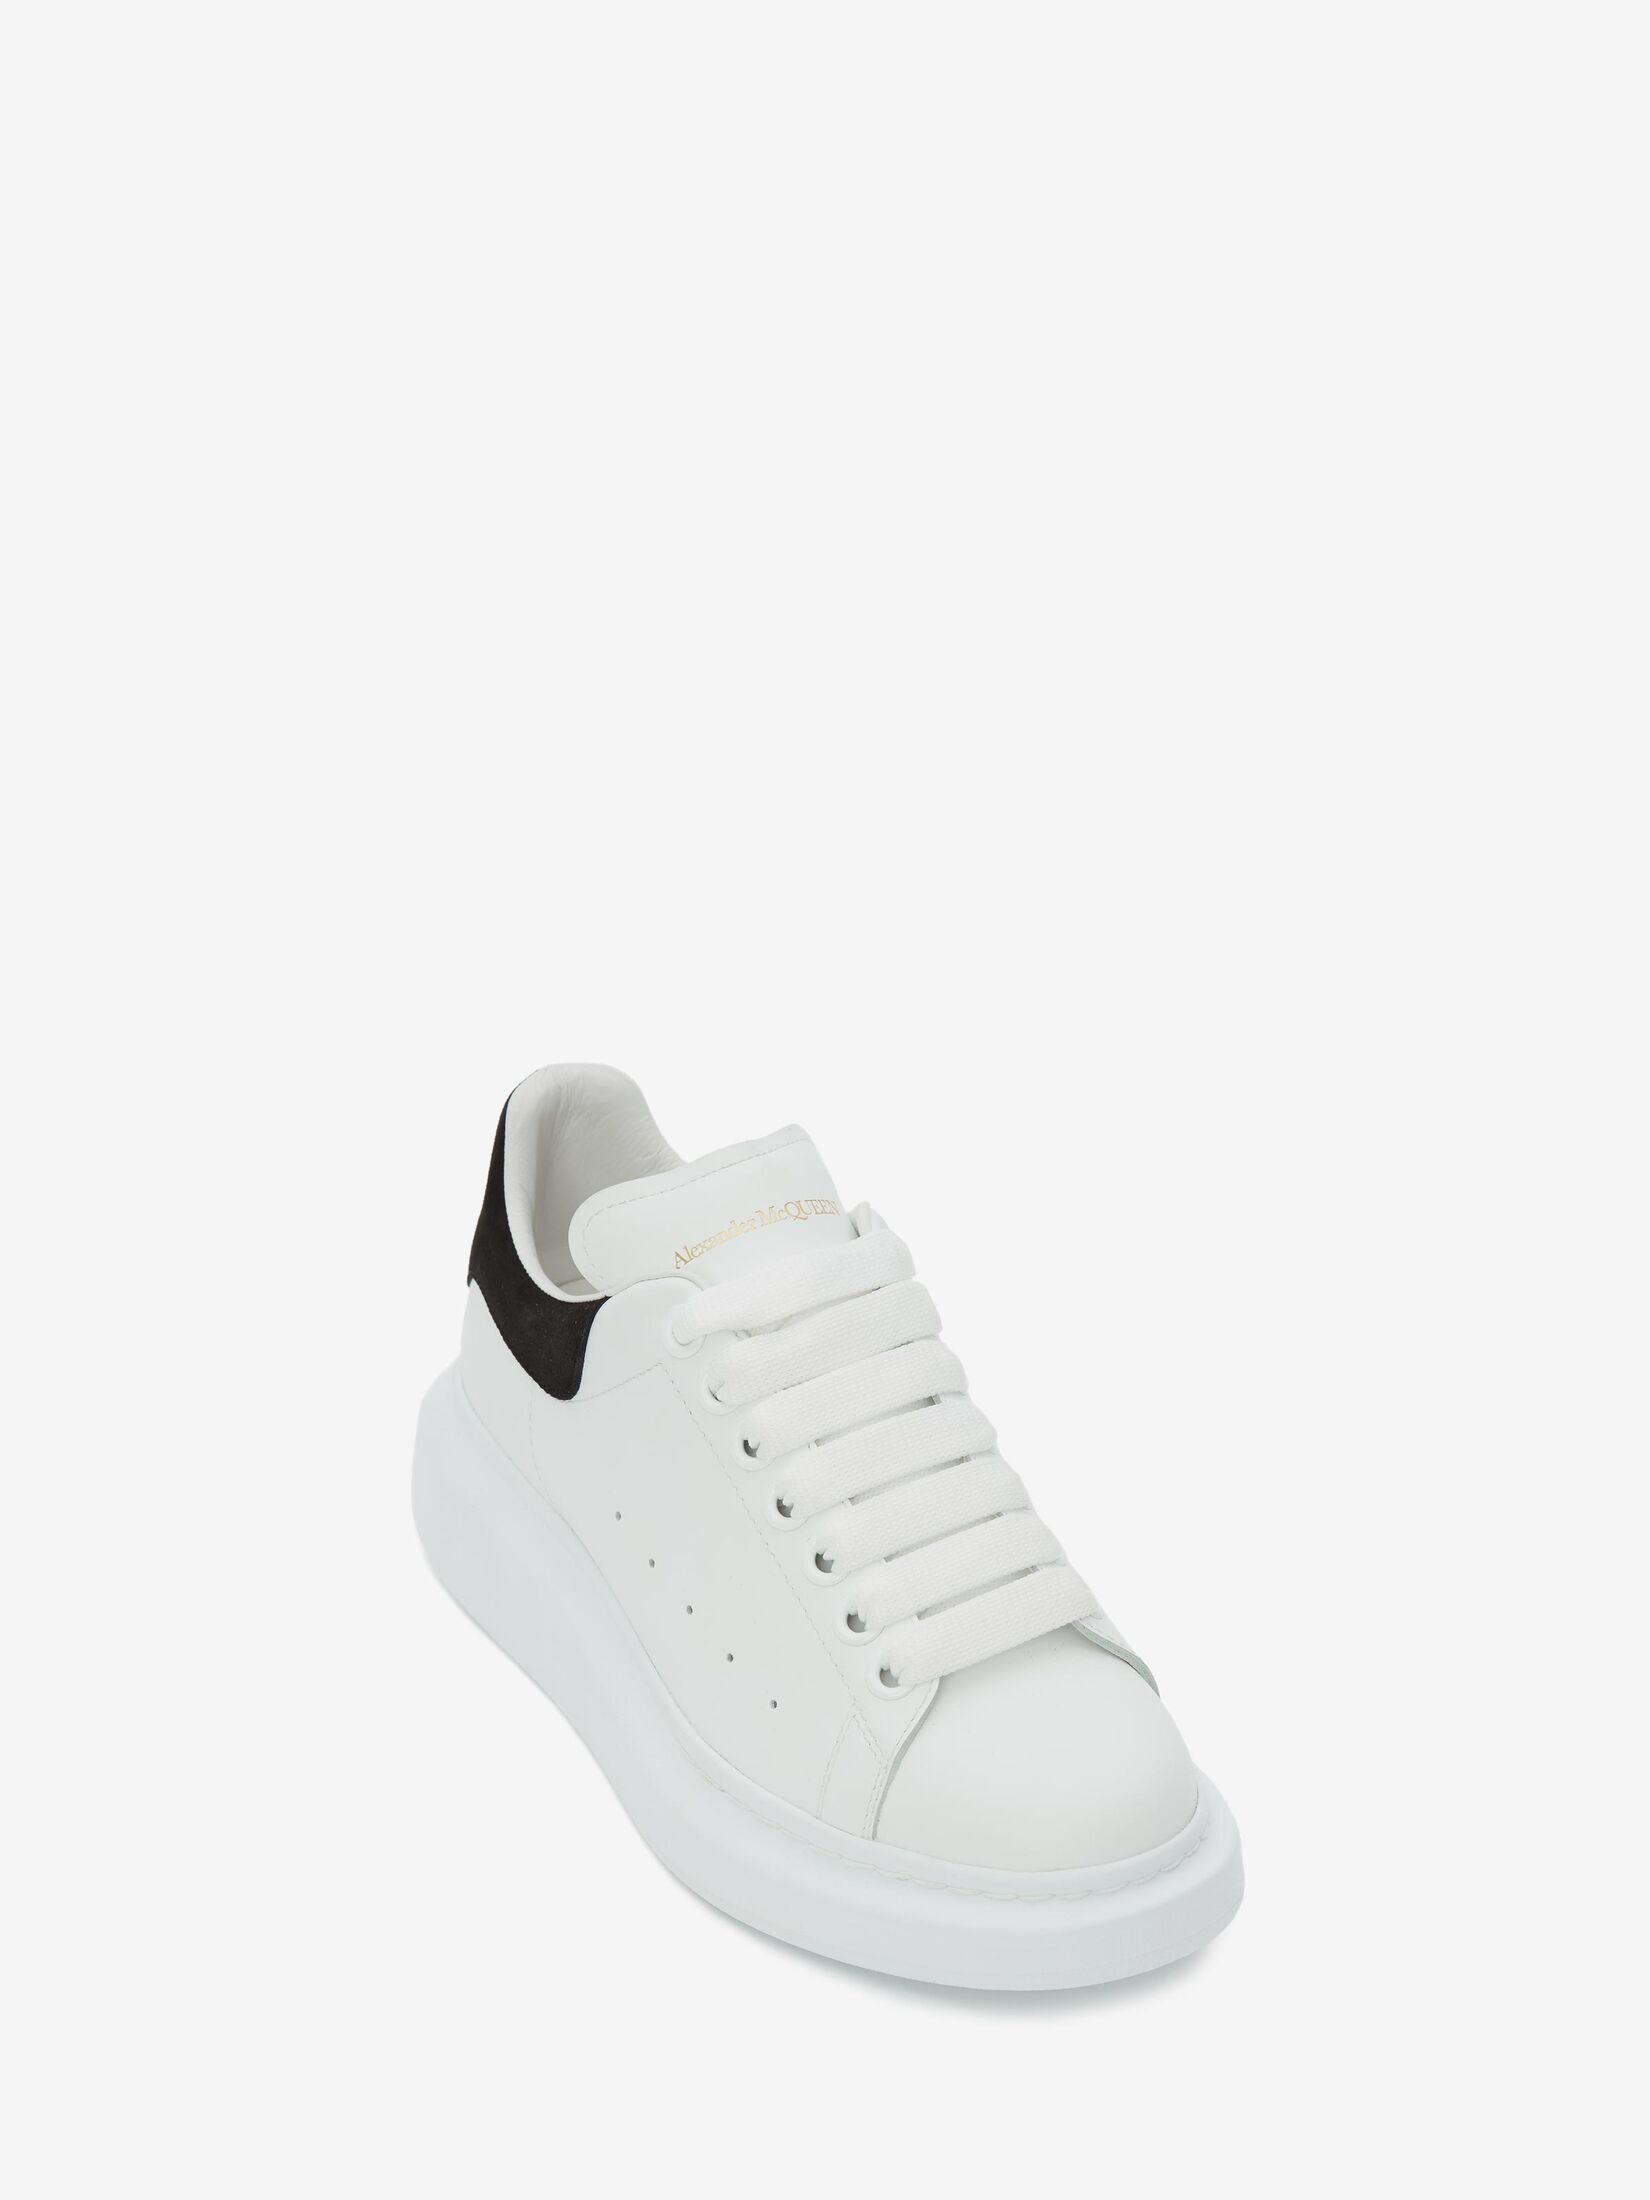 How to Style Alexander McQueen Oversized Shoes Sneakers Outfit Daily Inspi…  | Alexander mcqueen sneakers outfit, Alexander mcqueen sneakers, Alexander  mcqueen shoes